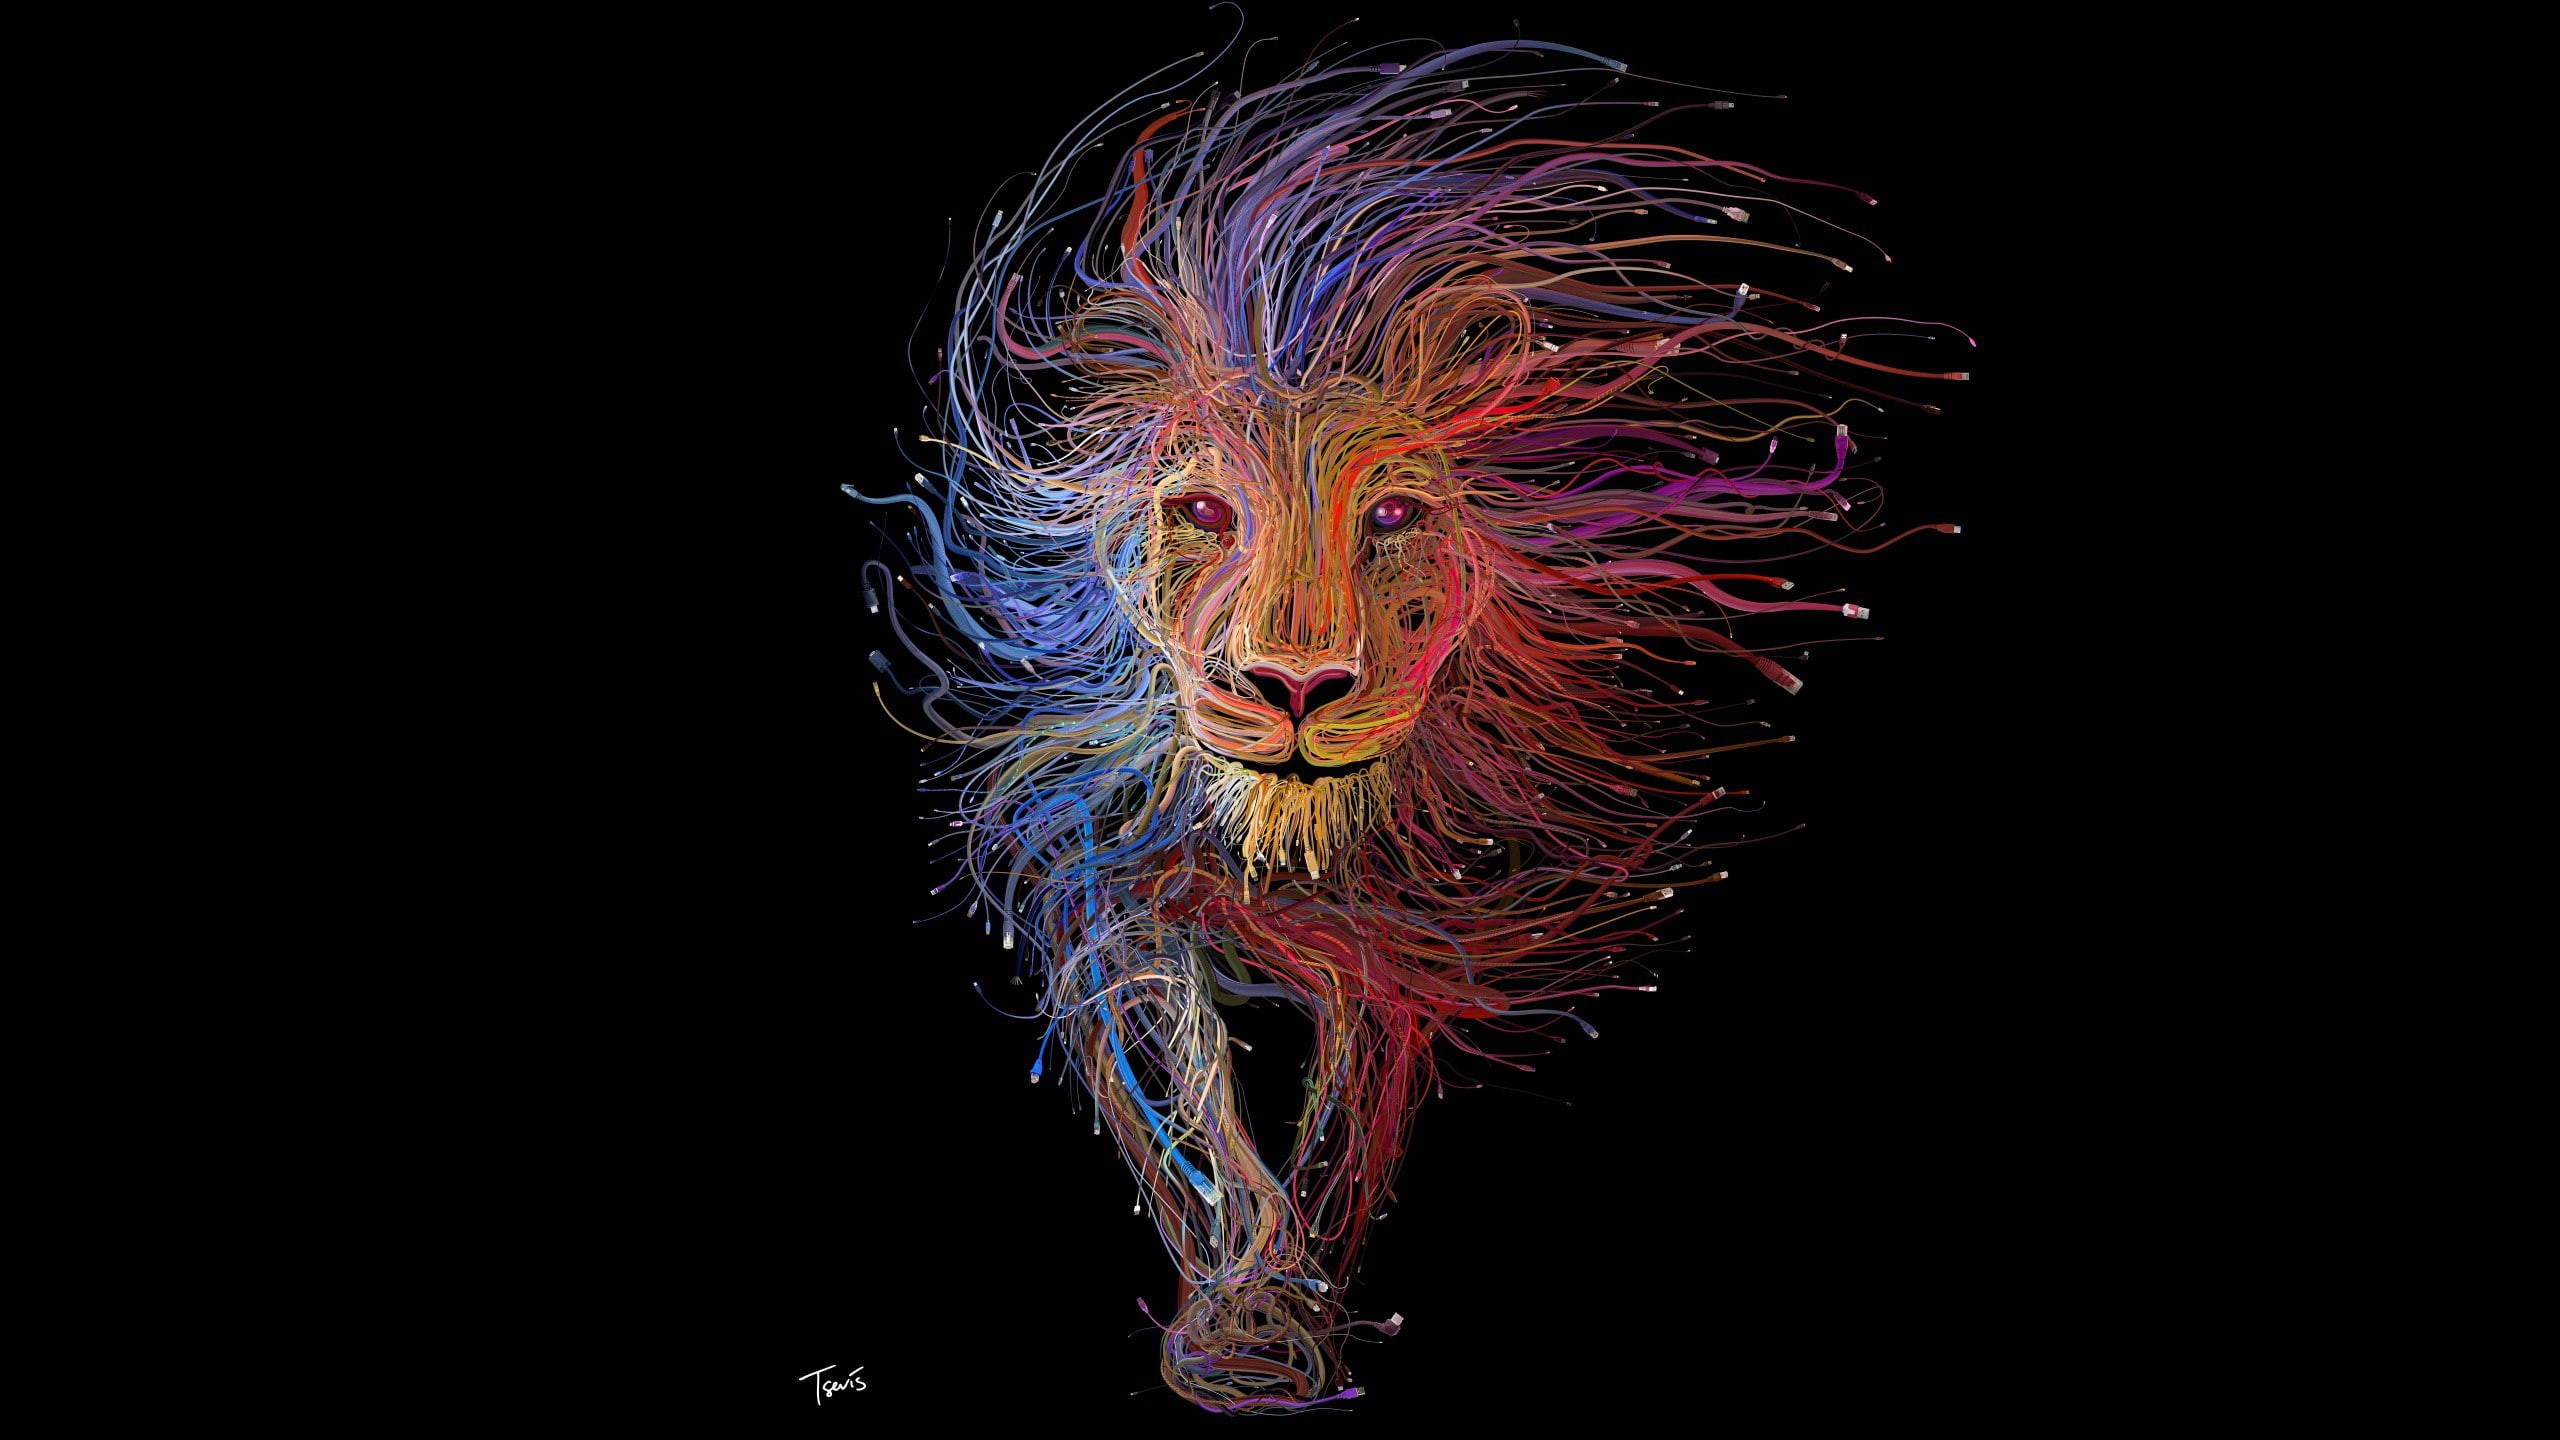 Wallpaper / glowing, multi colored, creativity, pattern, motion, wires lion digital art colorful usb animals black background ethernet, no people, illuminated, nature free download